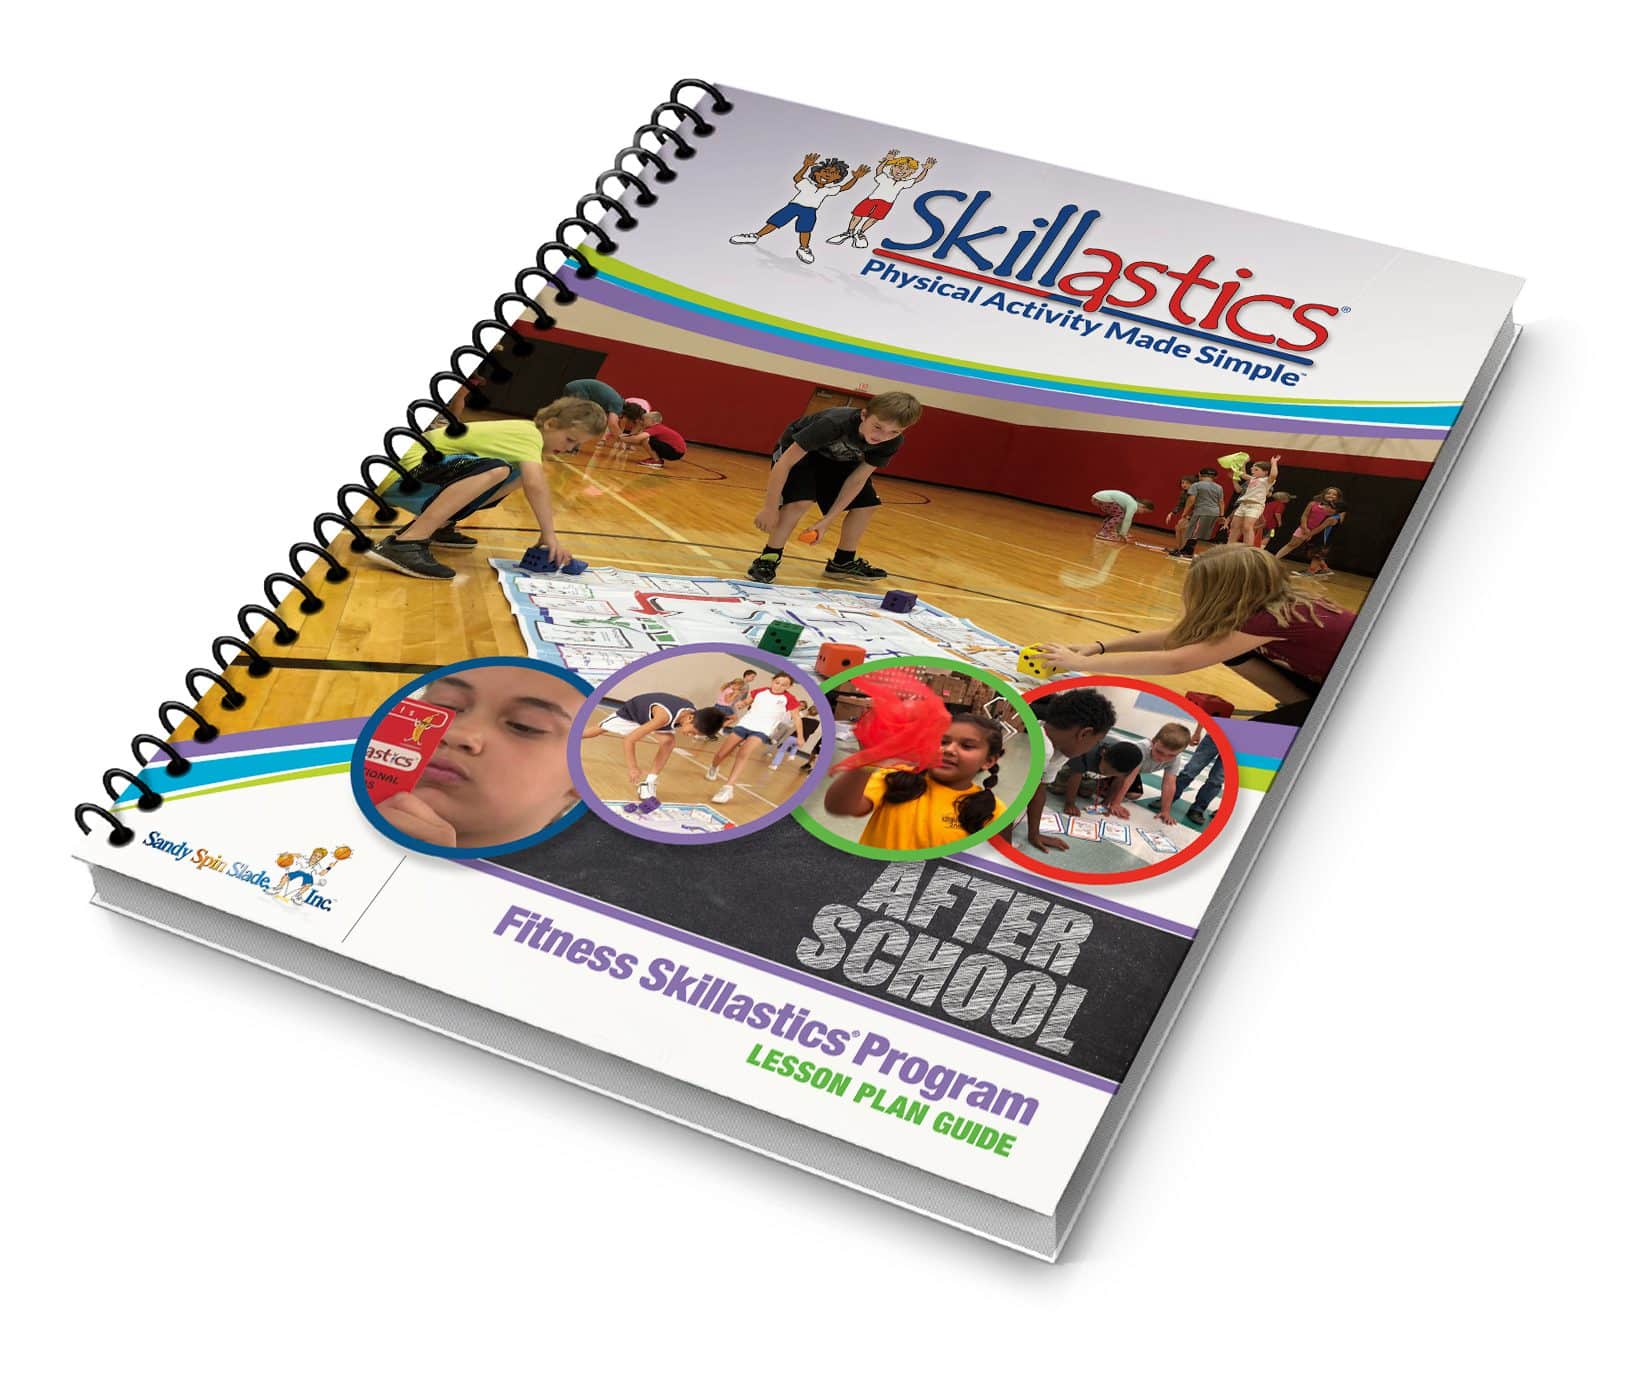 After School Fitness Skillastics® Lesson Plan Guide